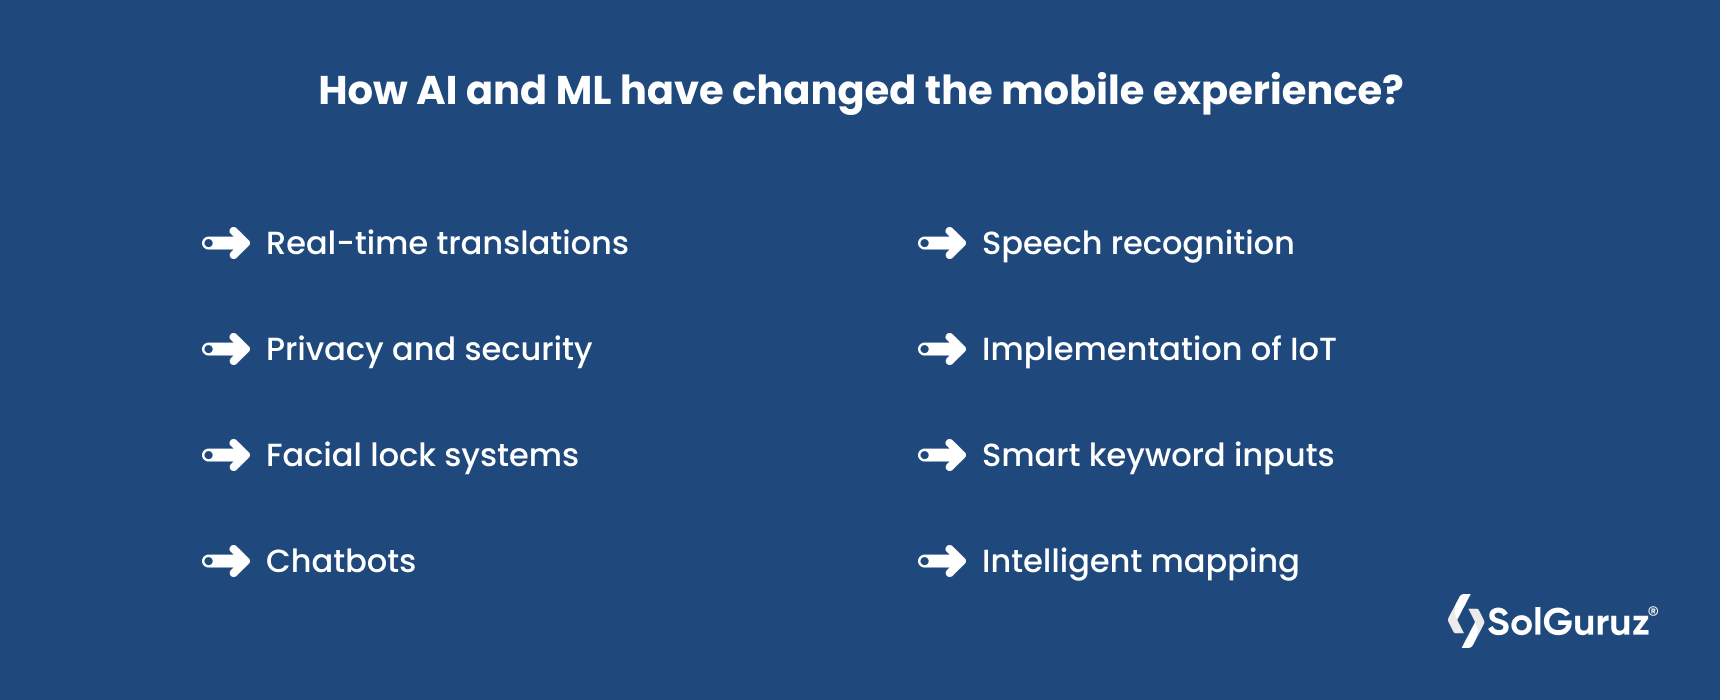 How AI and ML have changed the mobile experience